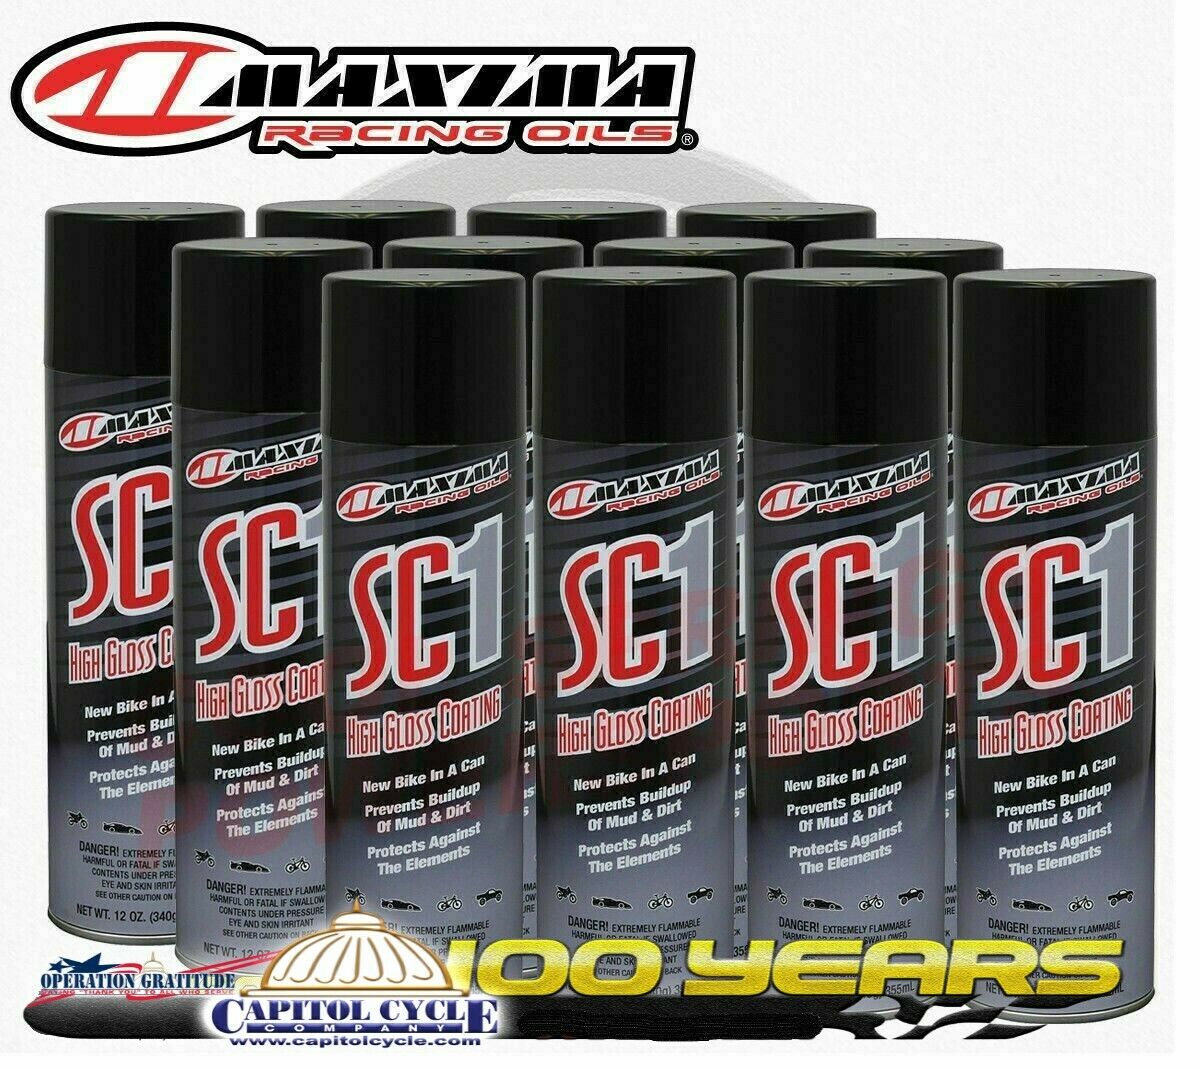 Maxima Racing Oils Sc1 High Gloss Silicone Clear Coat 17.2oz. Spray Case/12 Pack